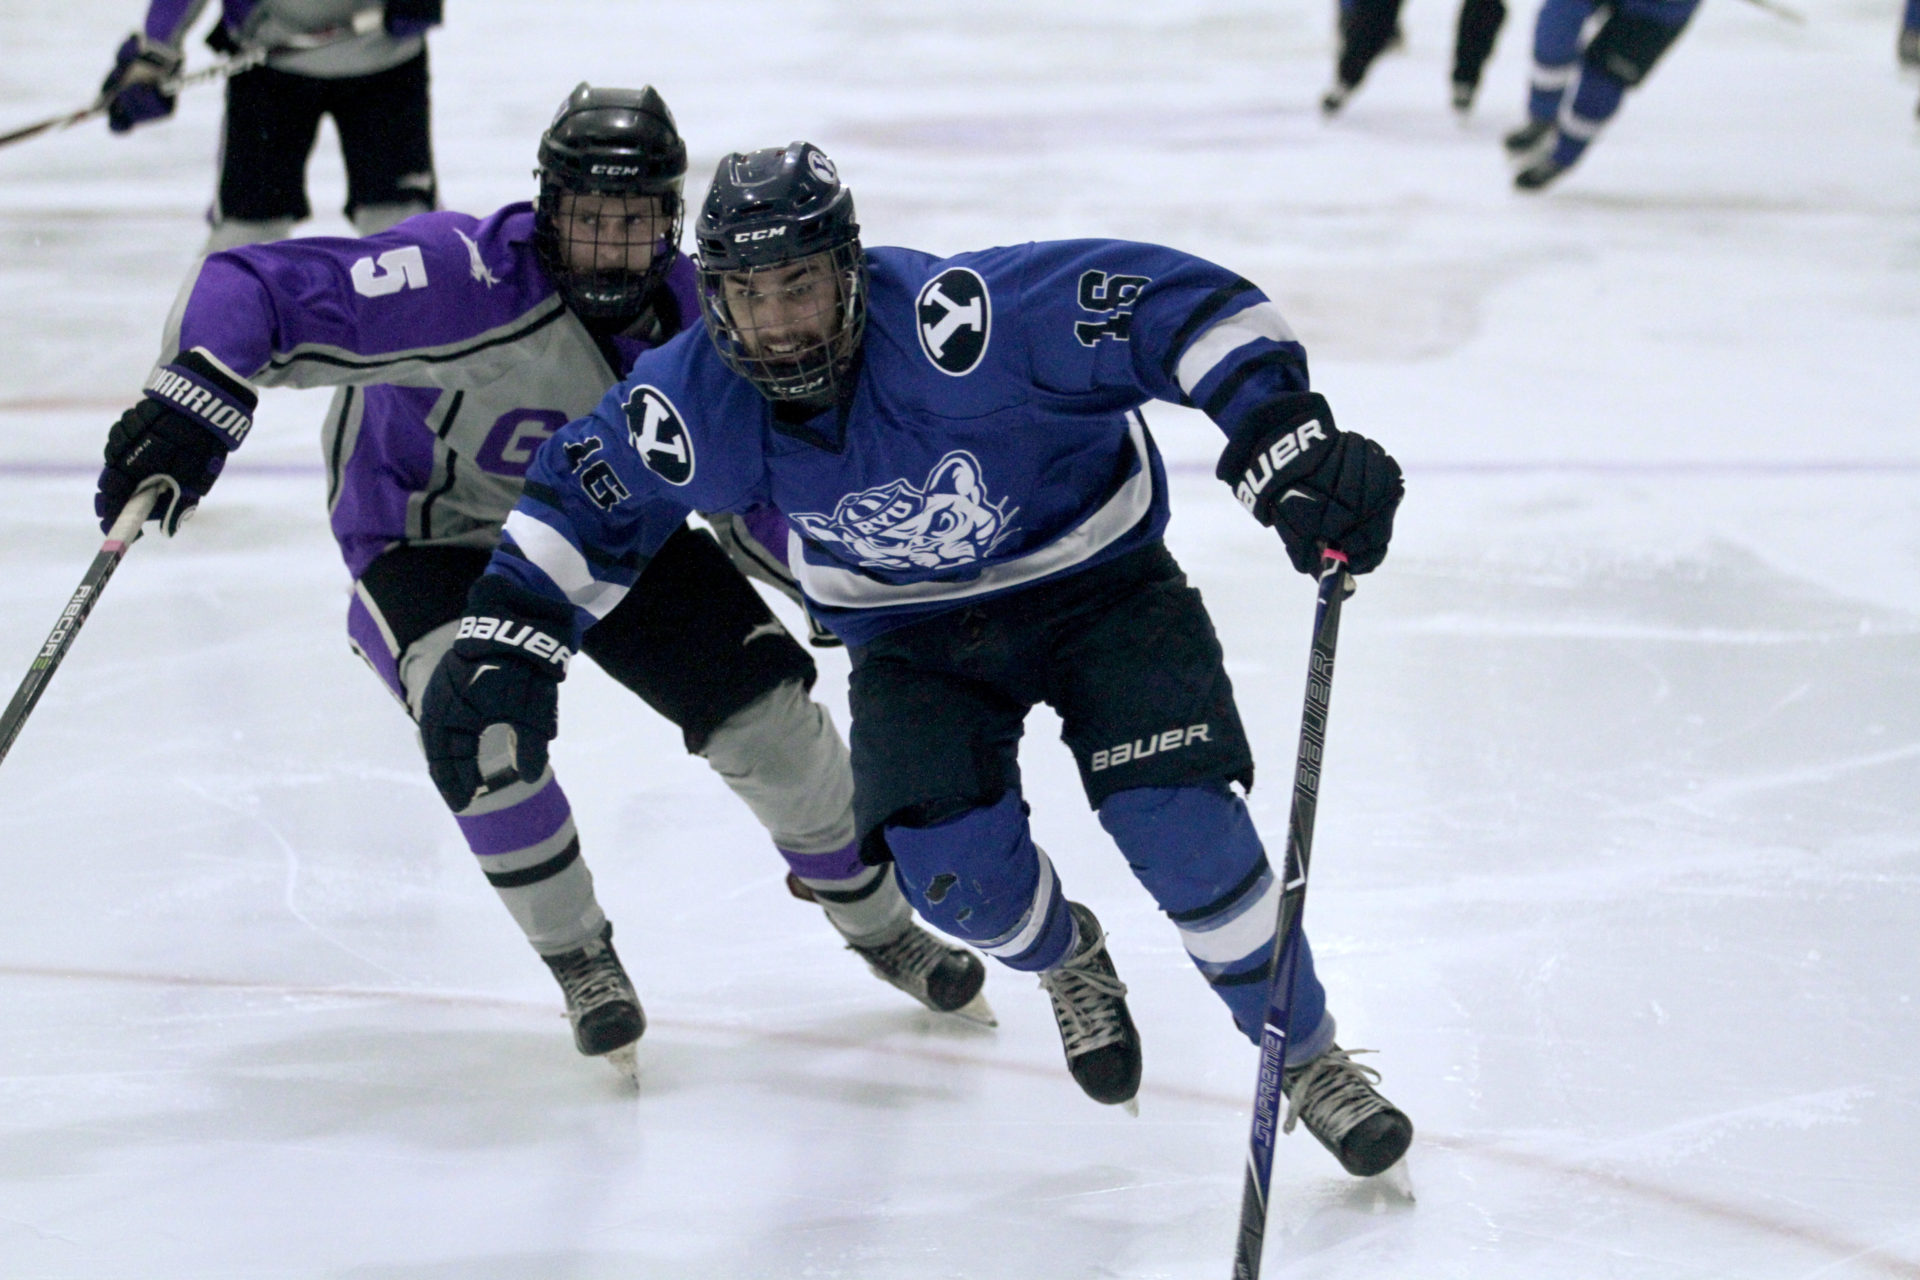 BYU hockey prepares for Western Division Regional playoffs after record